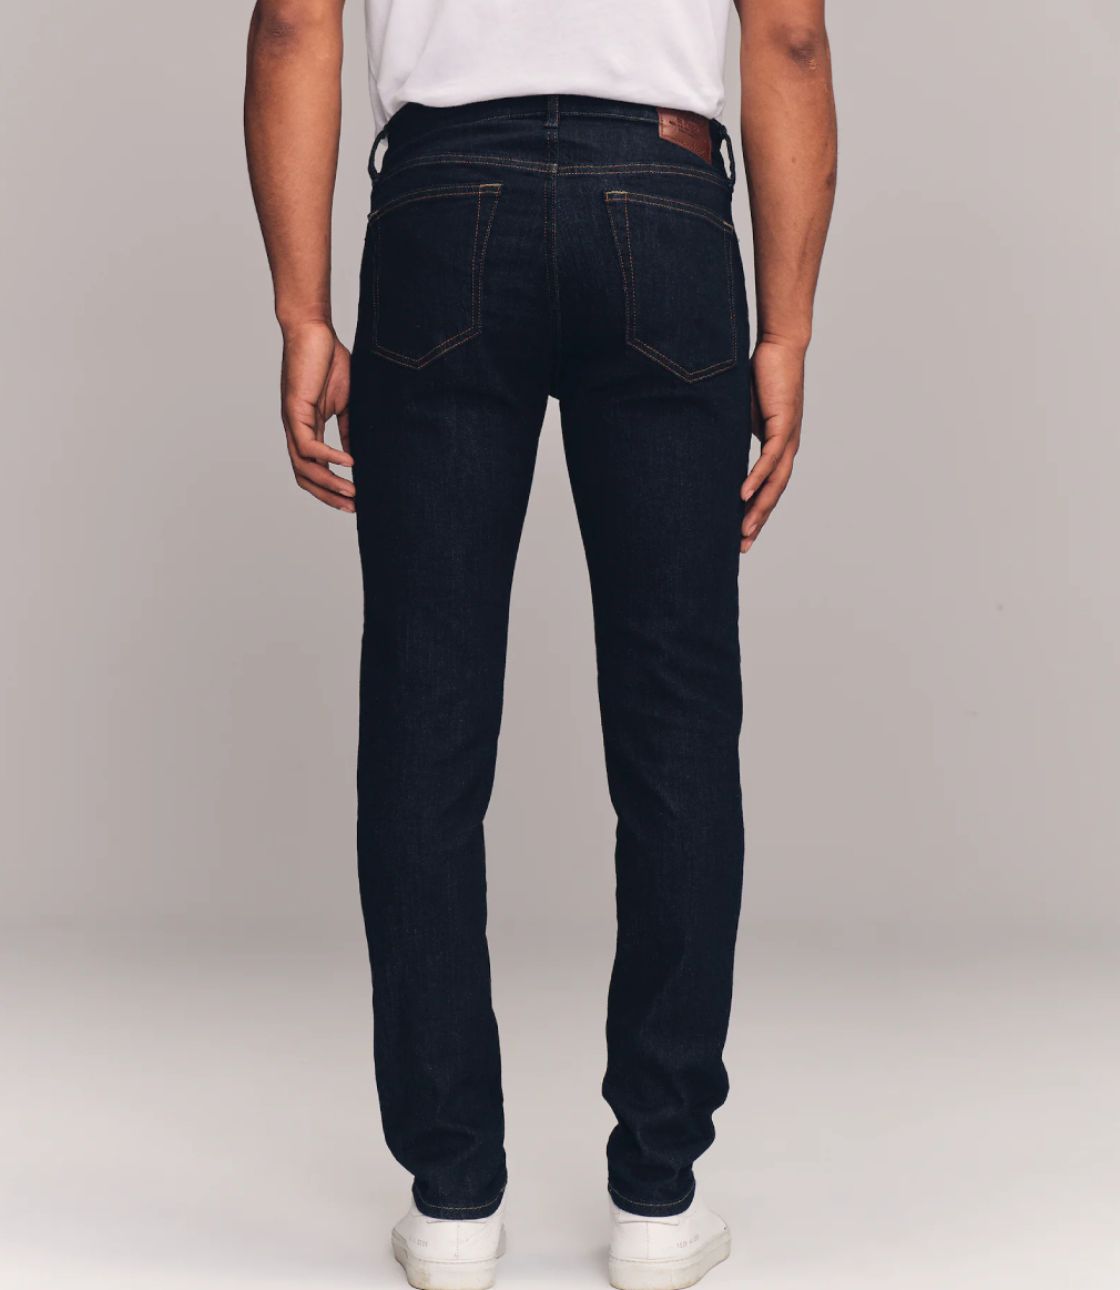 Quần Jeans Abercrombie & Fitch Skinny Fit 14